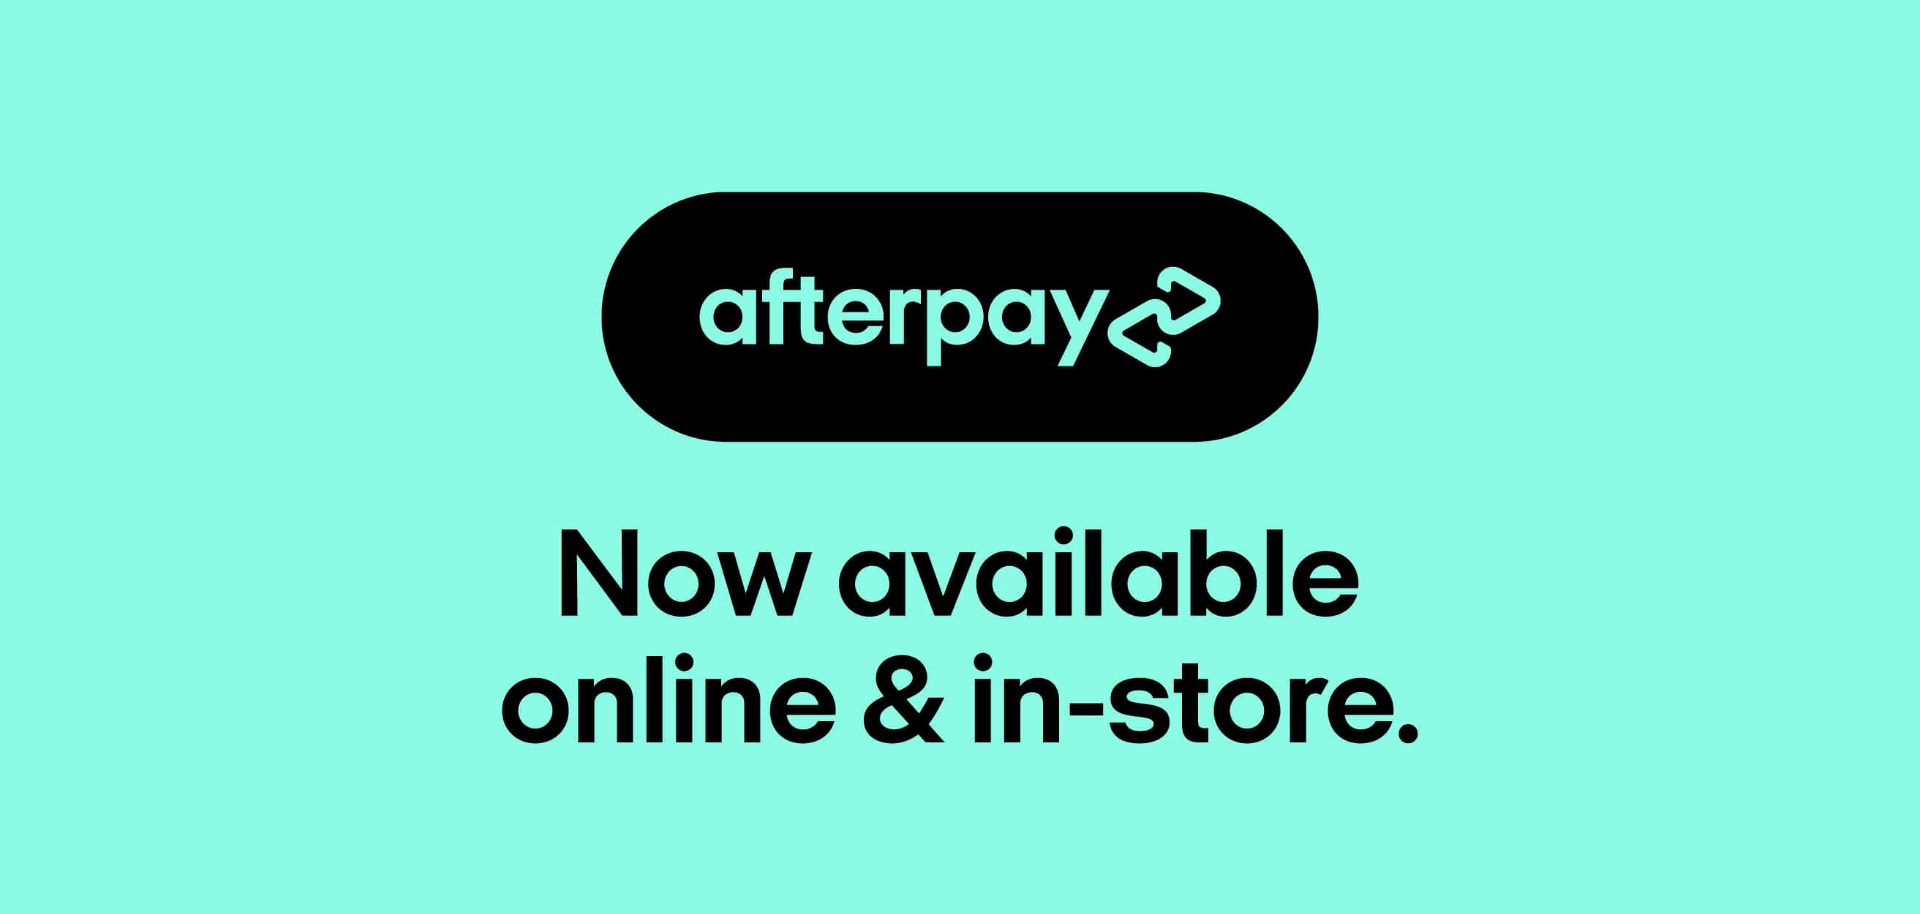 Afterpay now available online & in-store